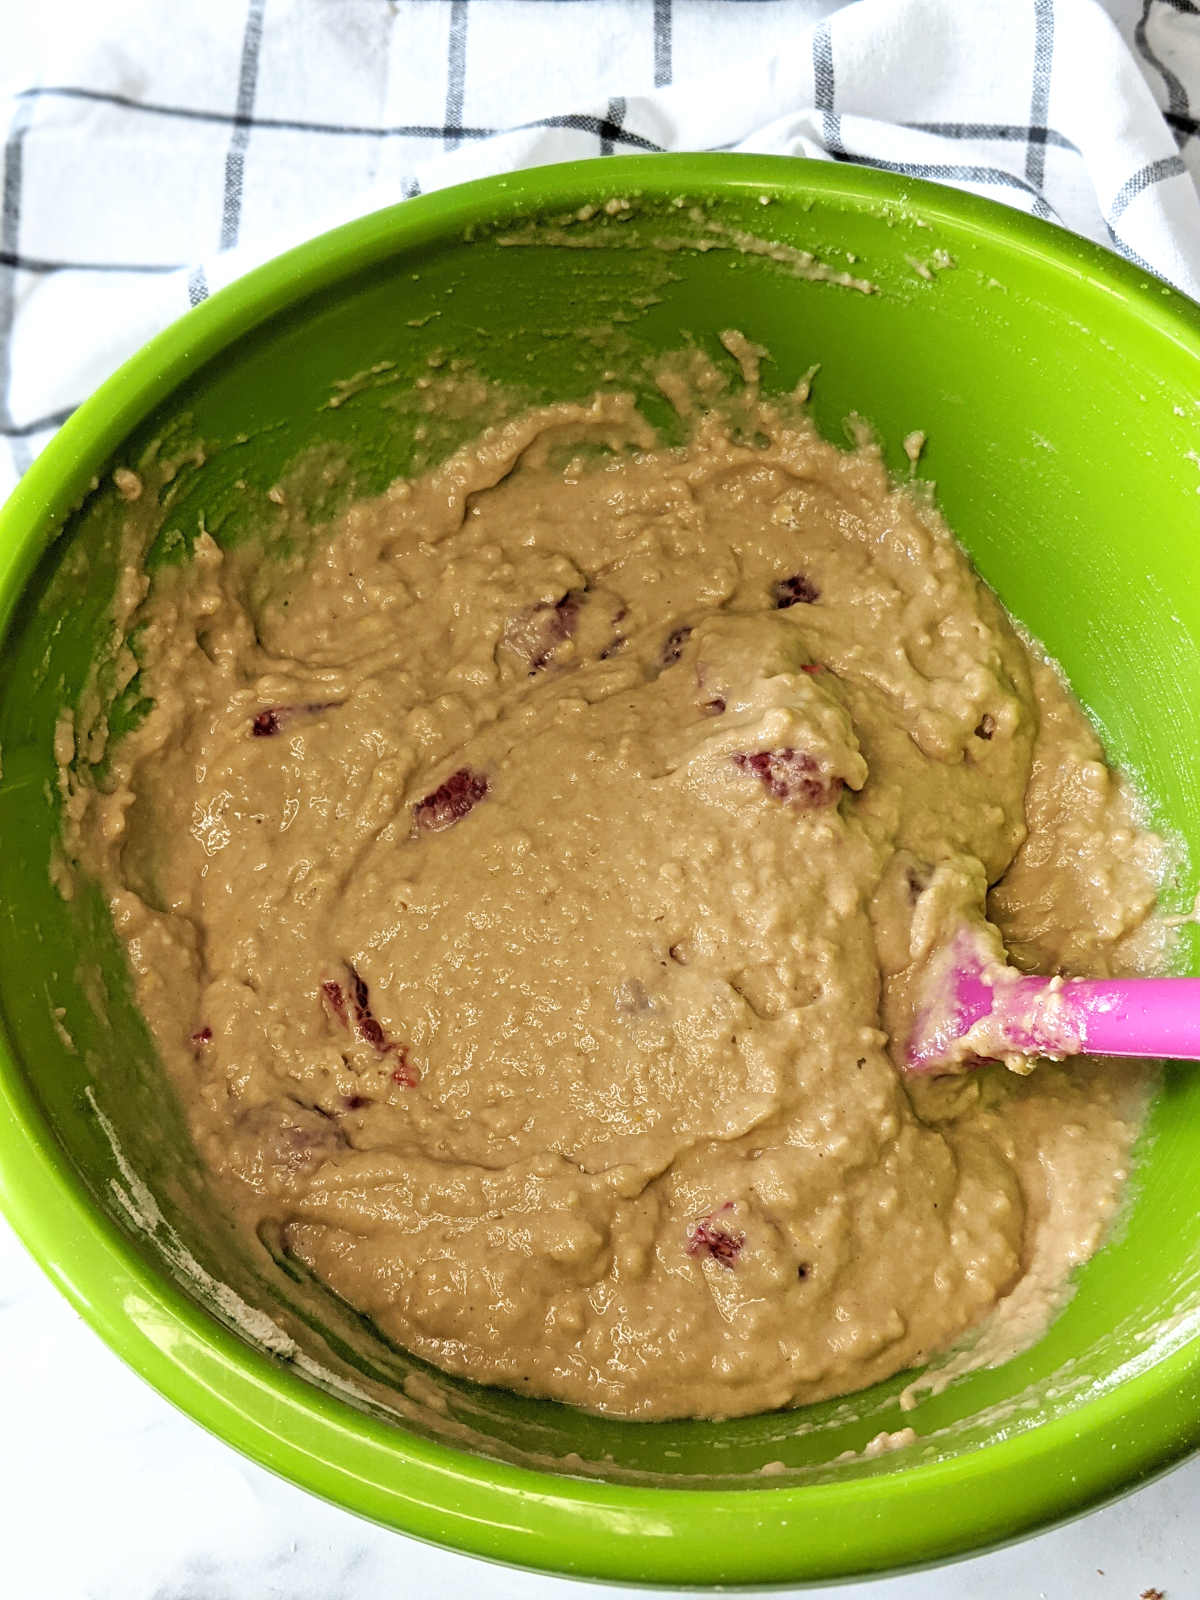 Raspberries mixed into the muffin batter in a large bowl.